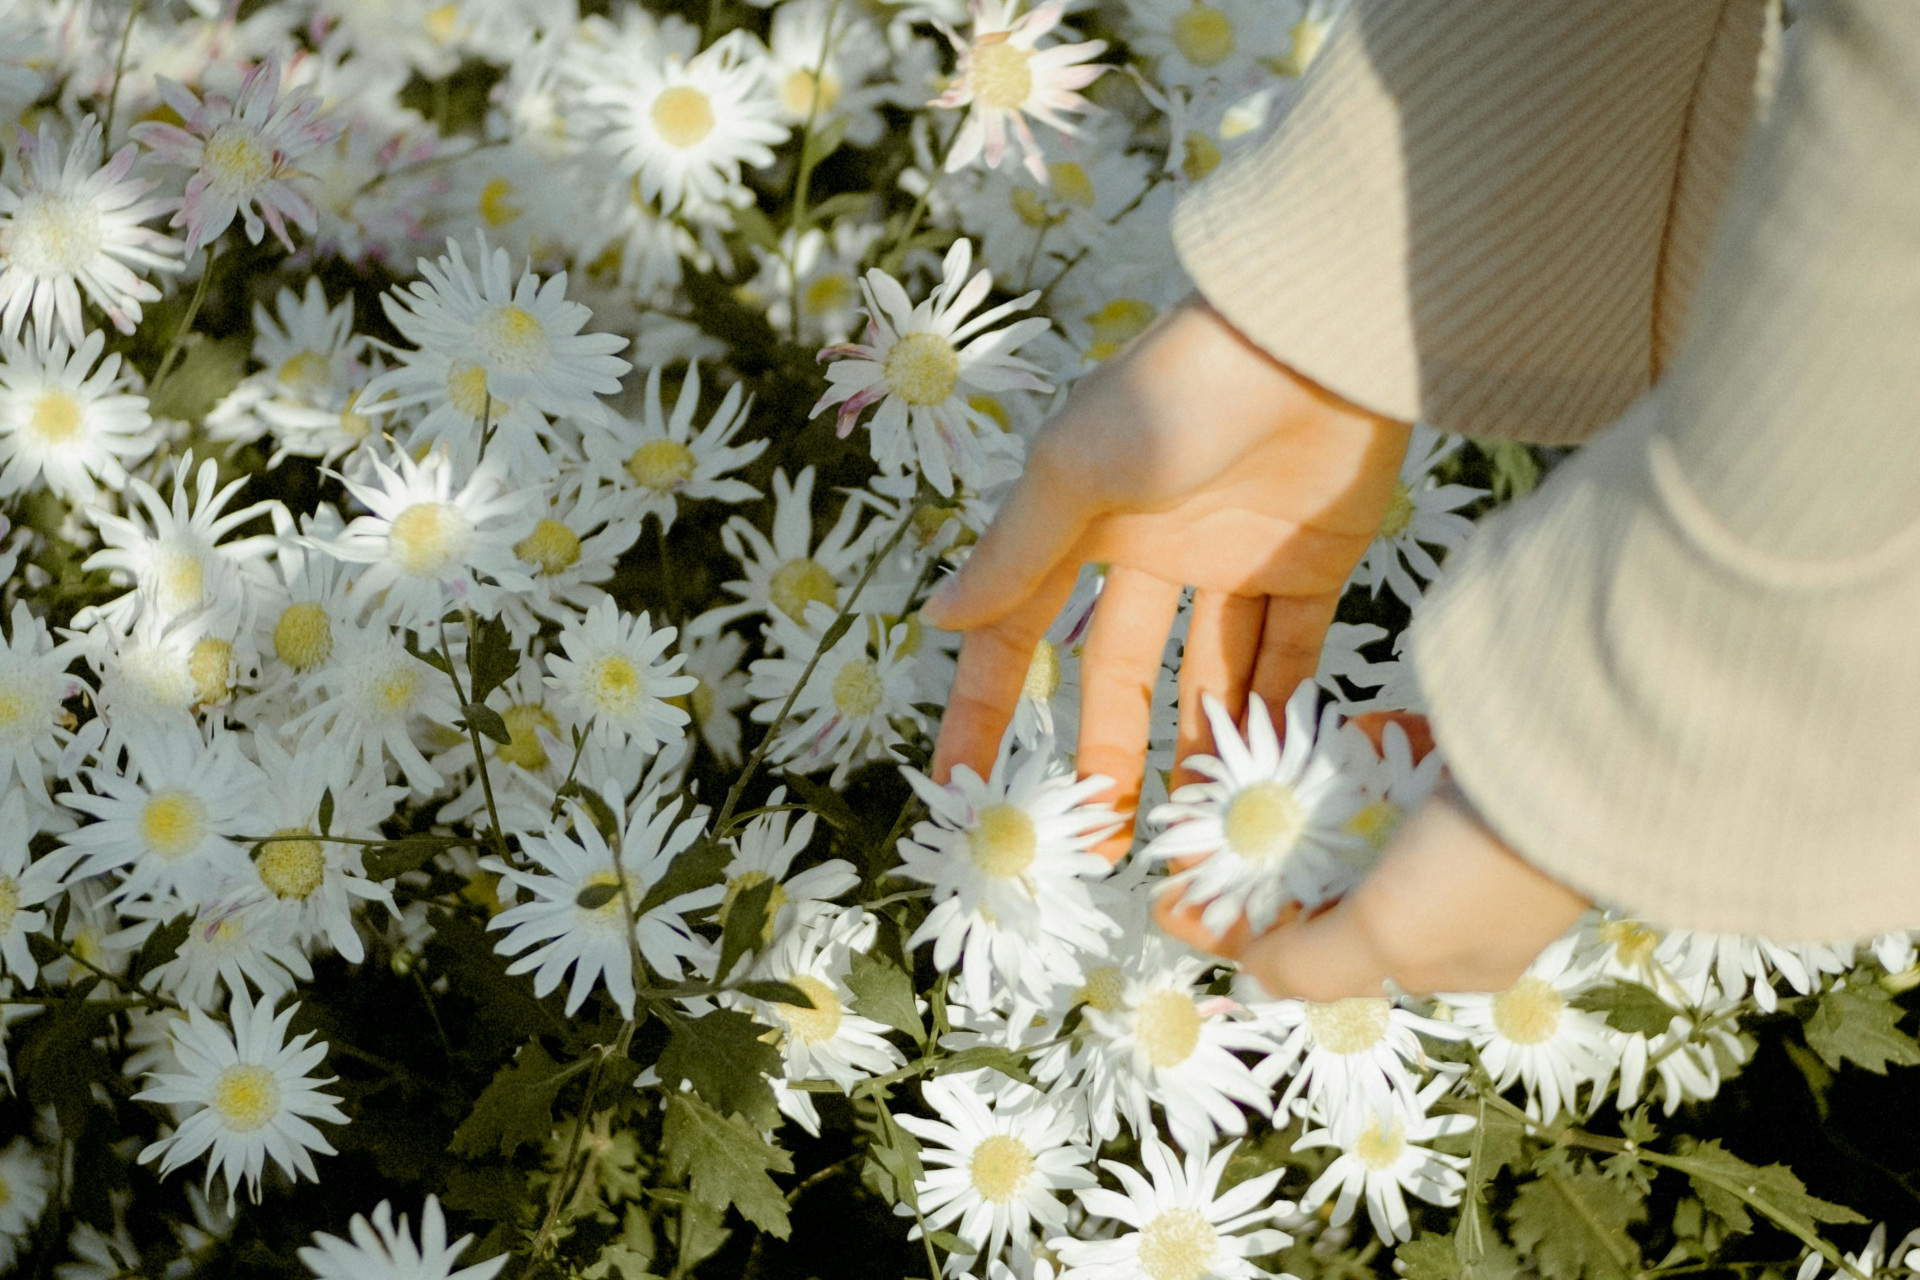 Daisy Nails: The Ultimate Springtime Manicure